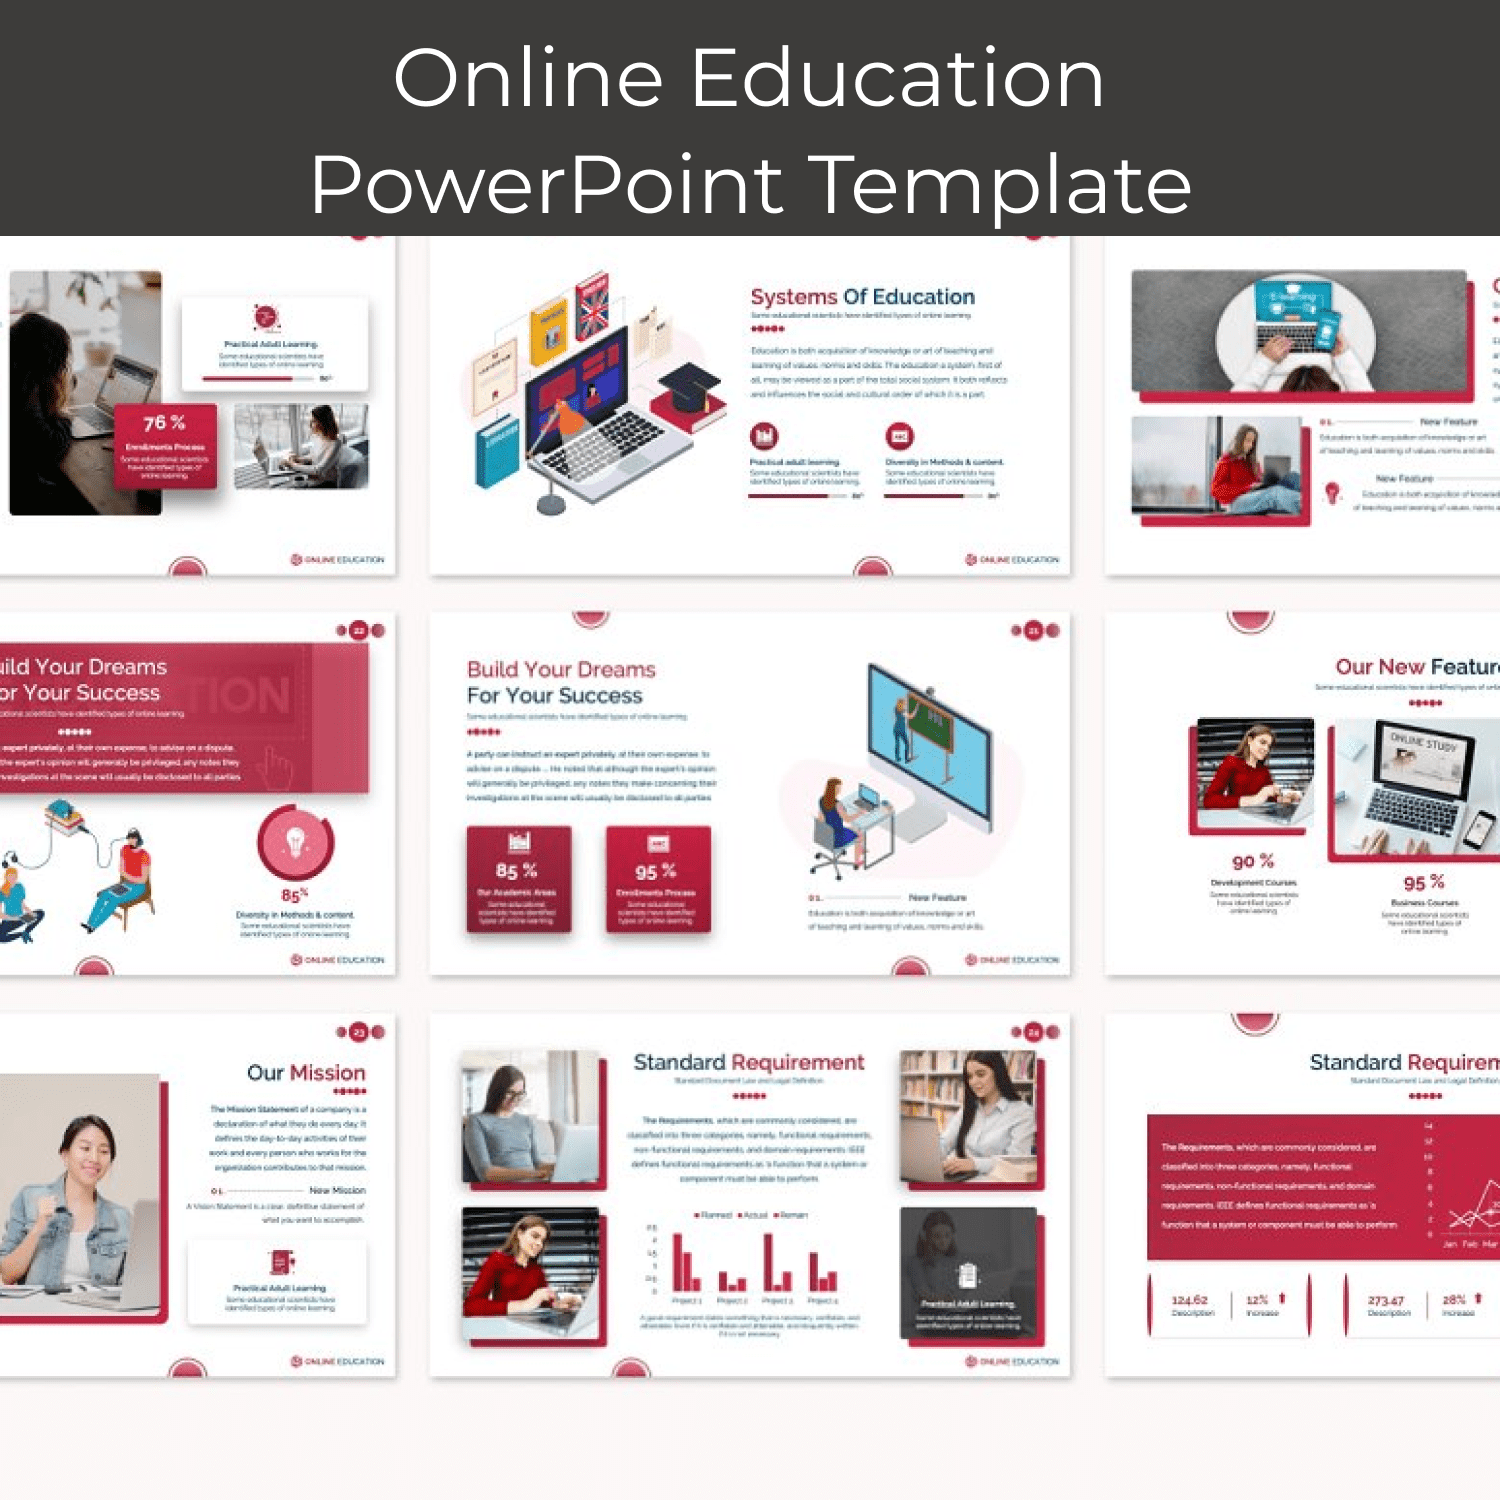 Online Education PowerPoint Template cover.